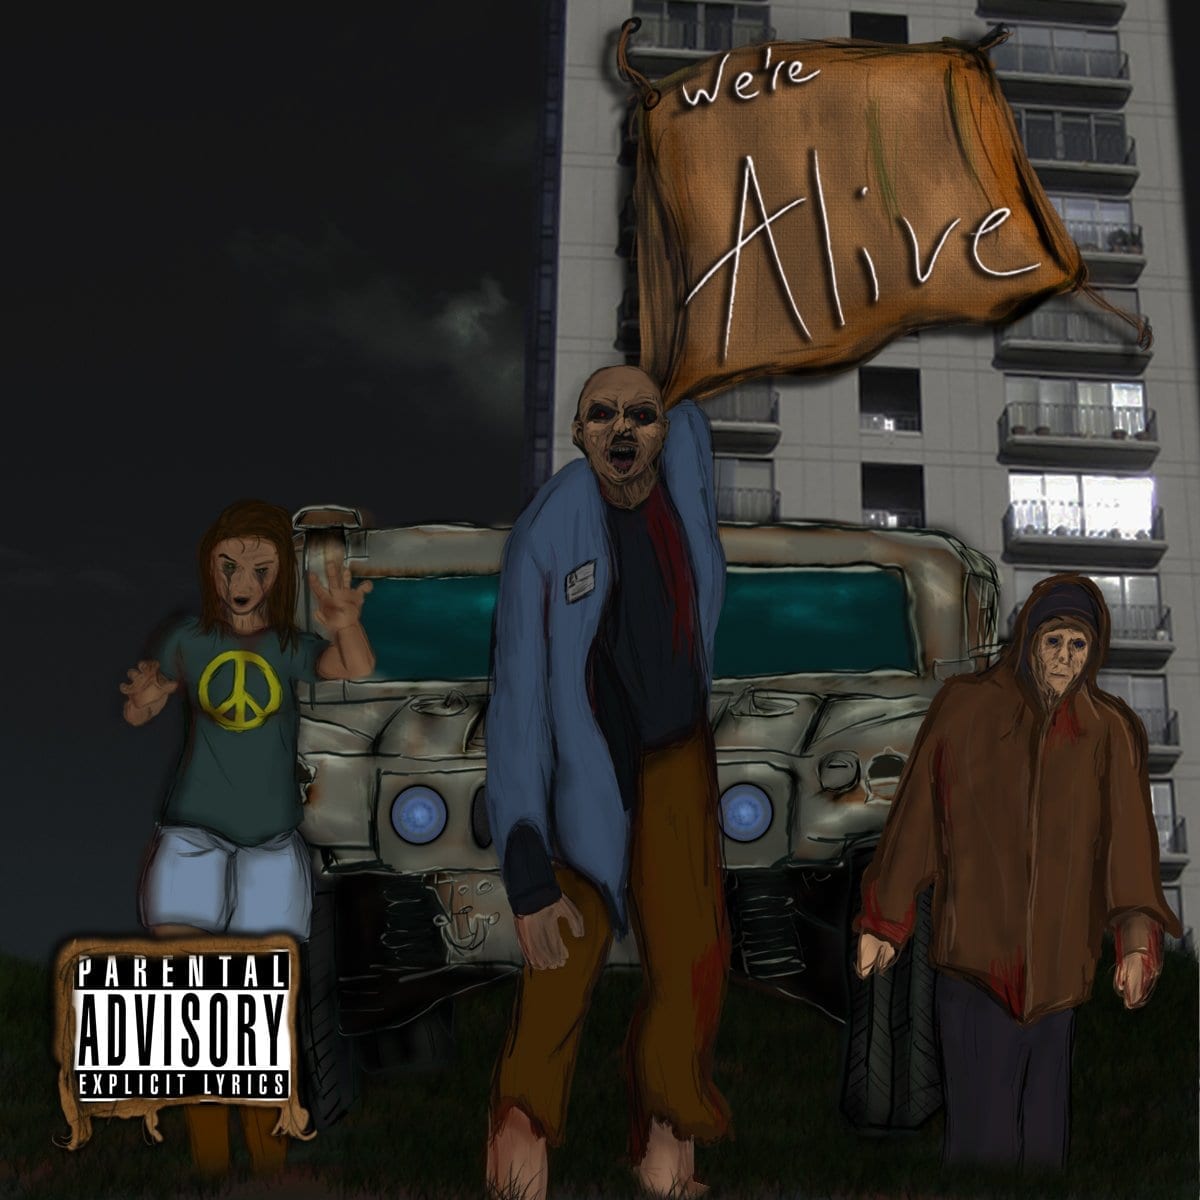 Cover Art for episode 1 of the We're Alive podcast with 3 zombies in front of a large jeep and high rise building at night